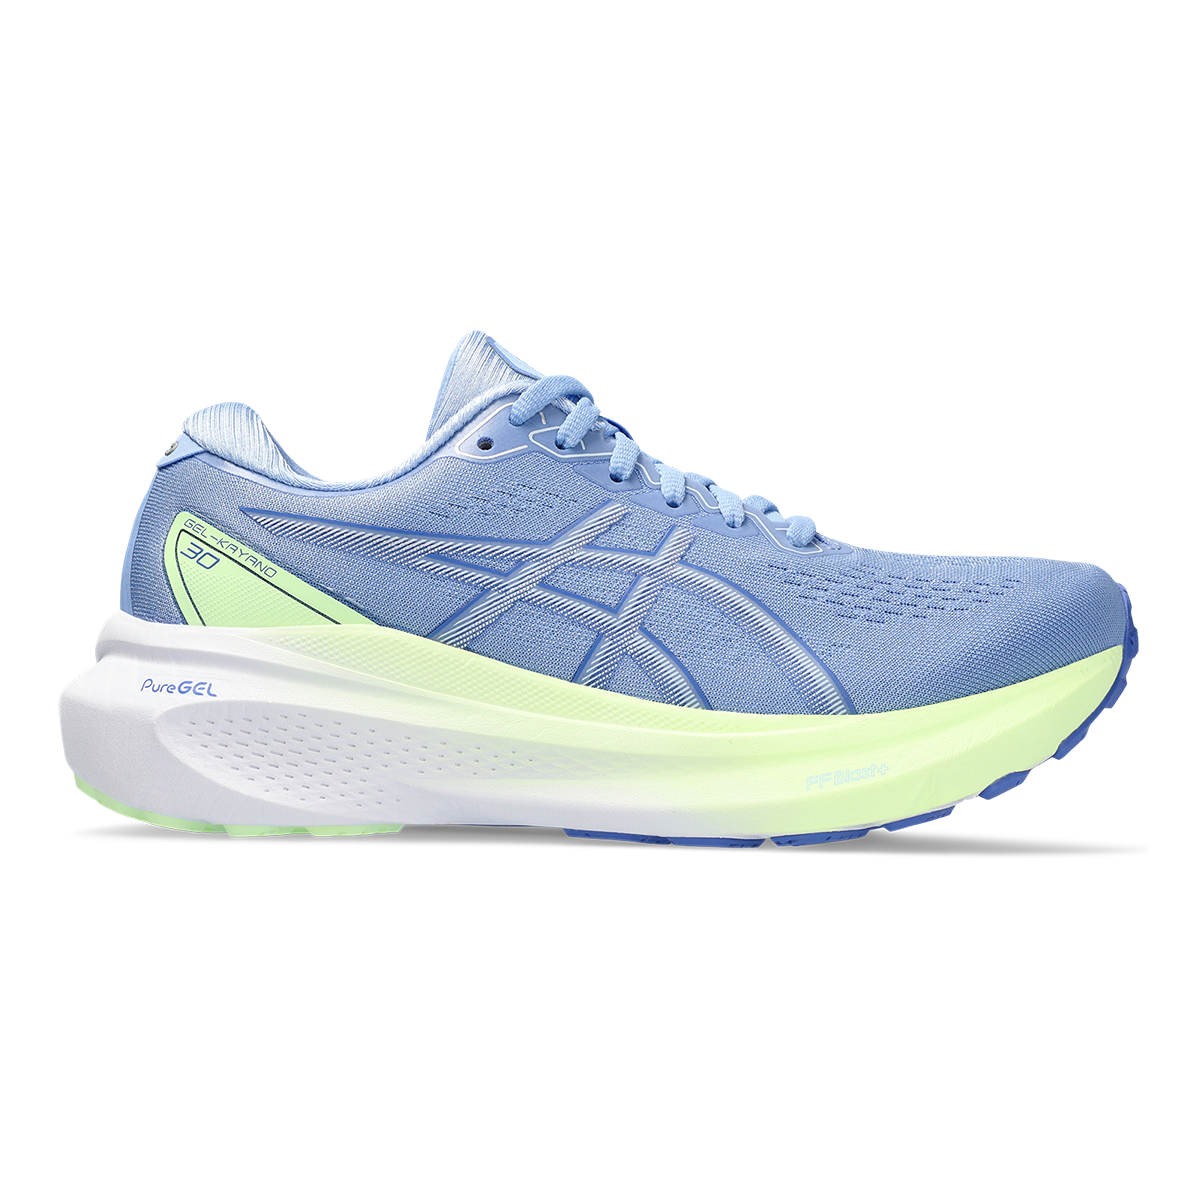 Asics Gel-Kayano 30 review: Better comfort, stability and style